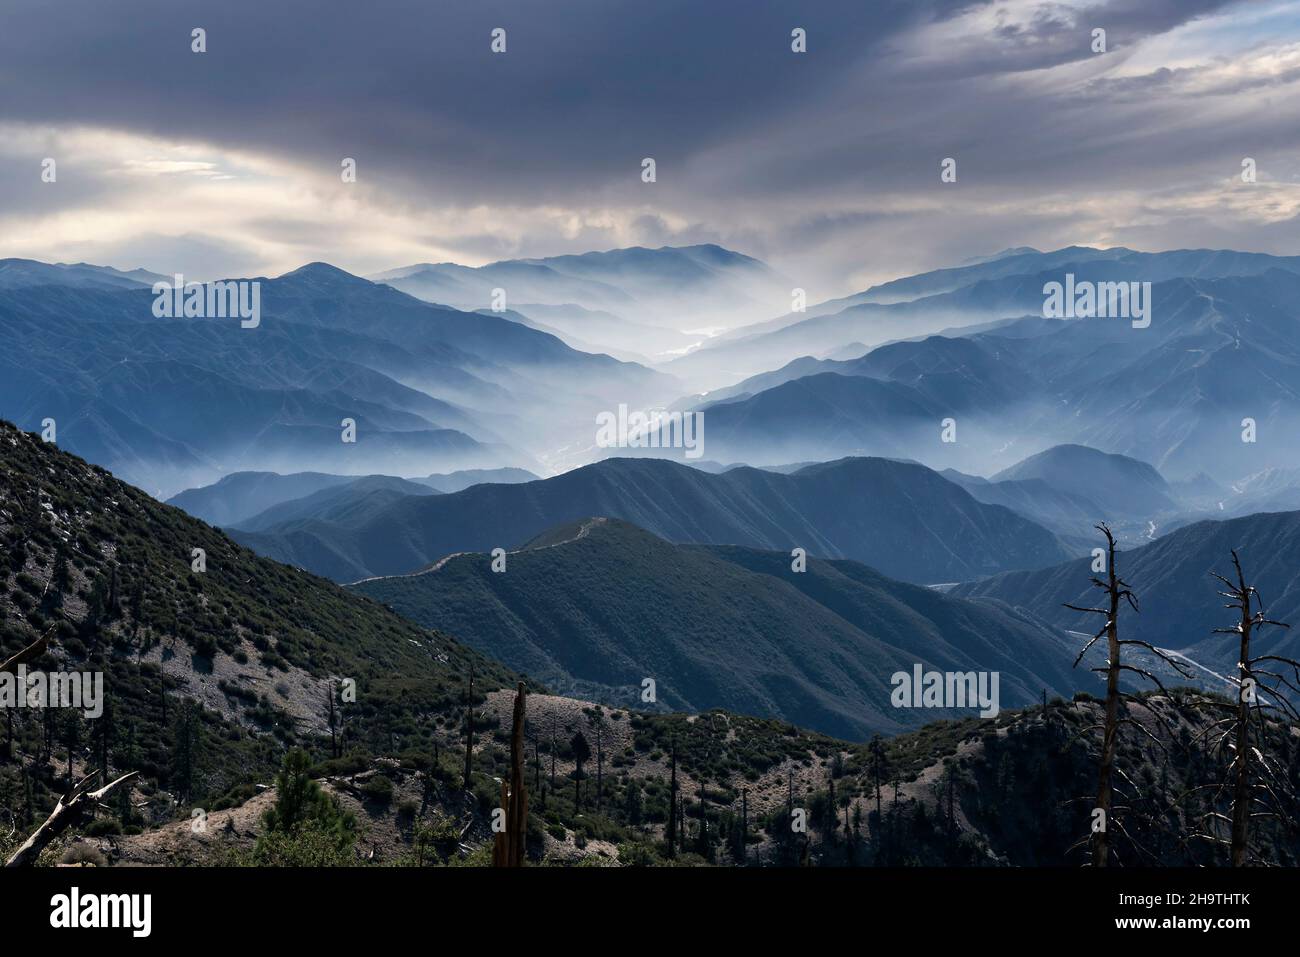 View of San Gabriel Canyon from the South Mt Hawkins Lookout Trail in the Angeles National Forest area of Los Angeles County, California. Stock Photo